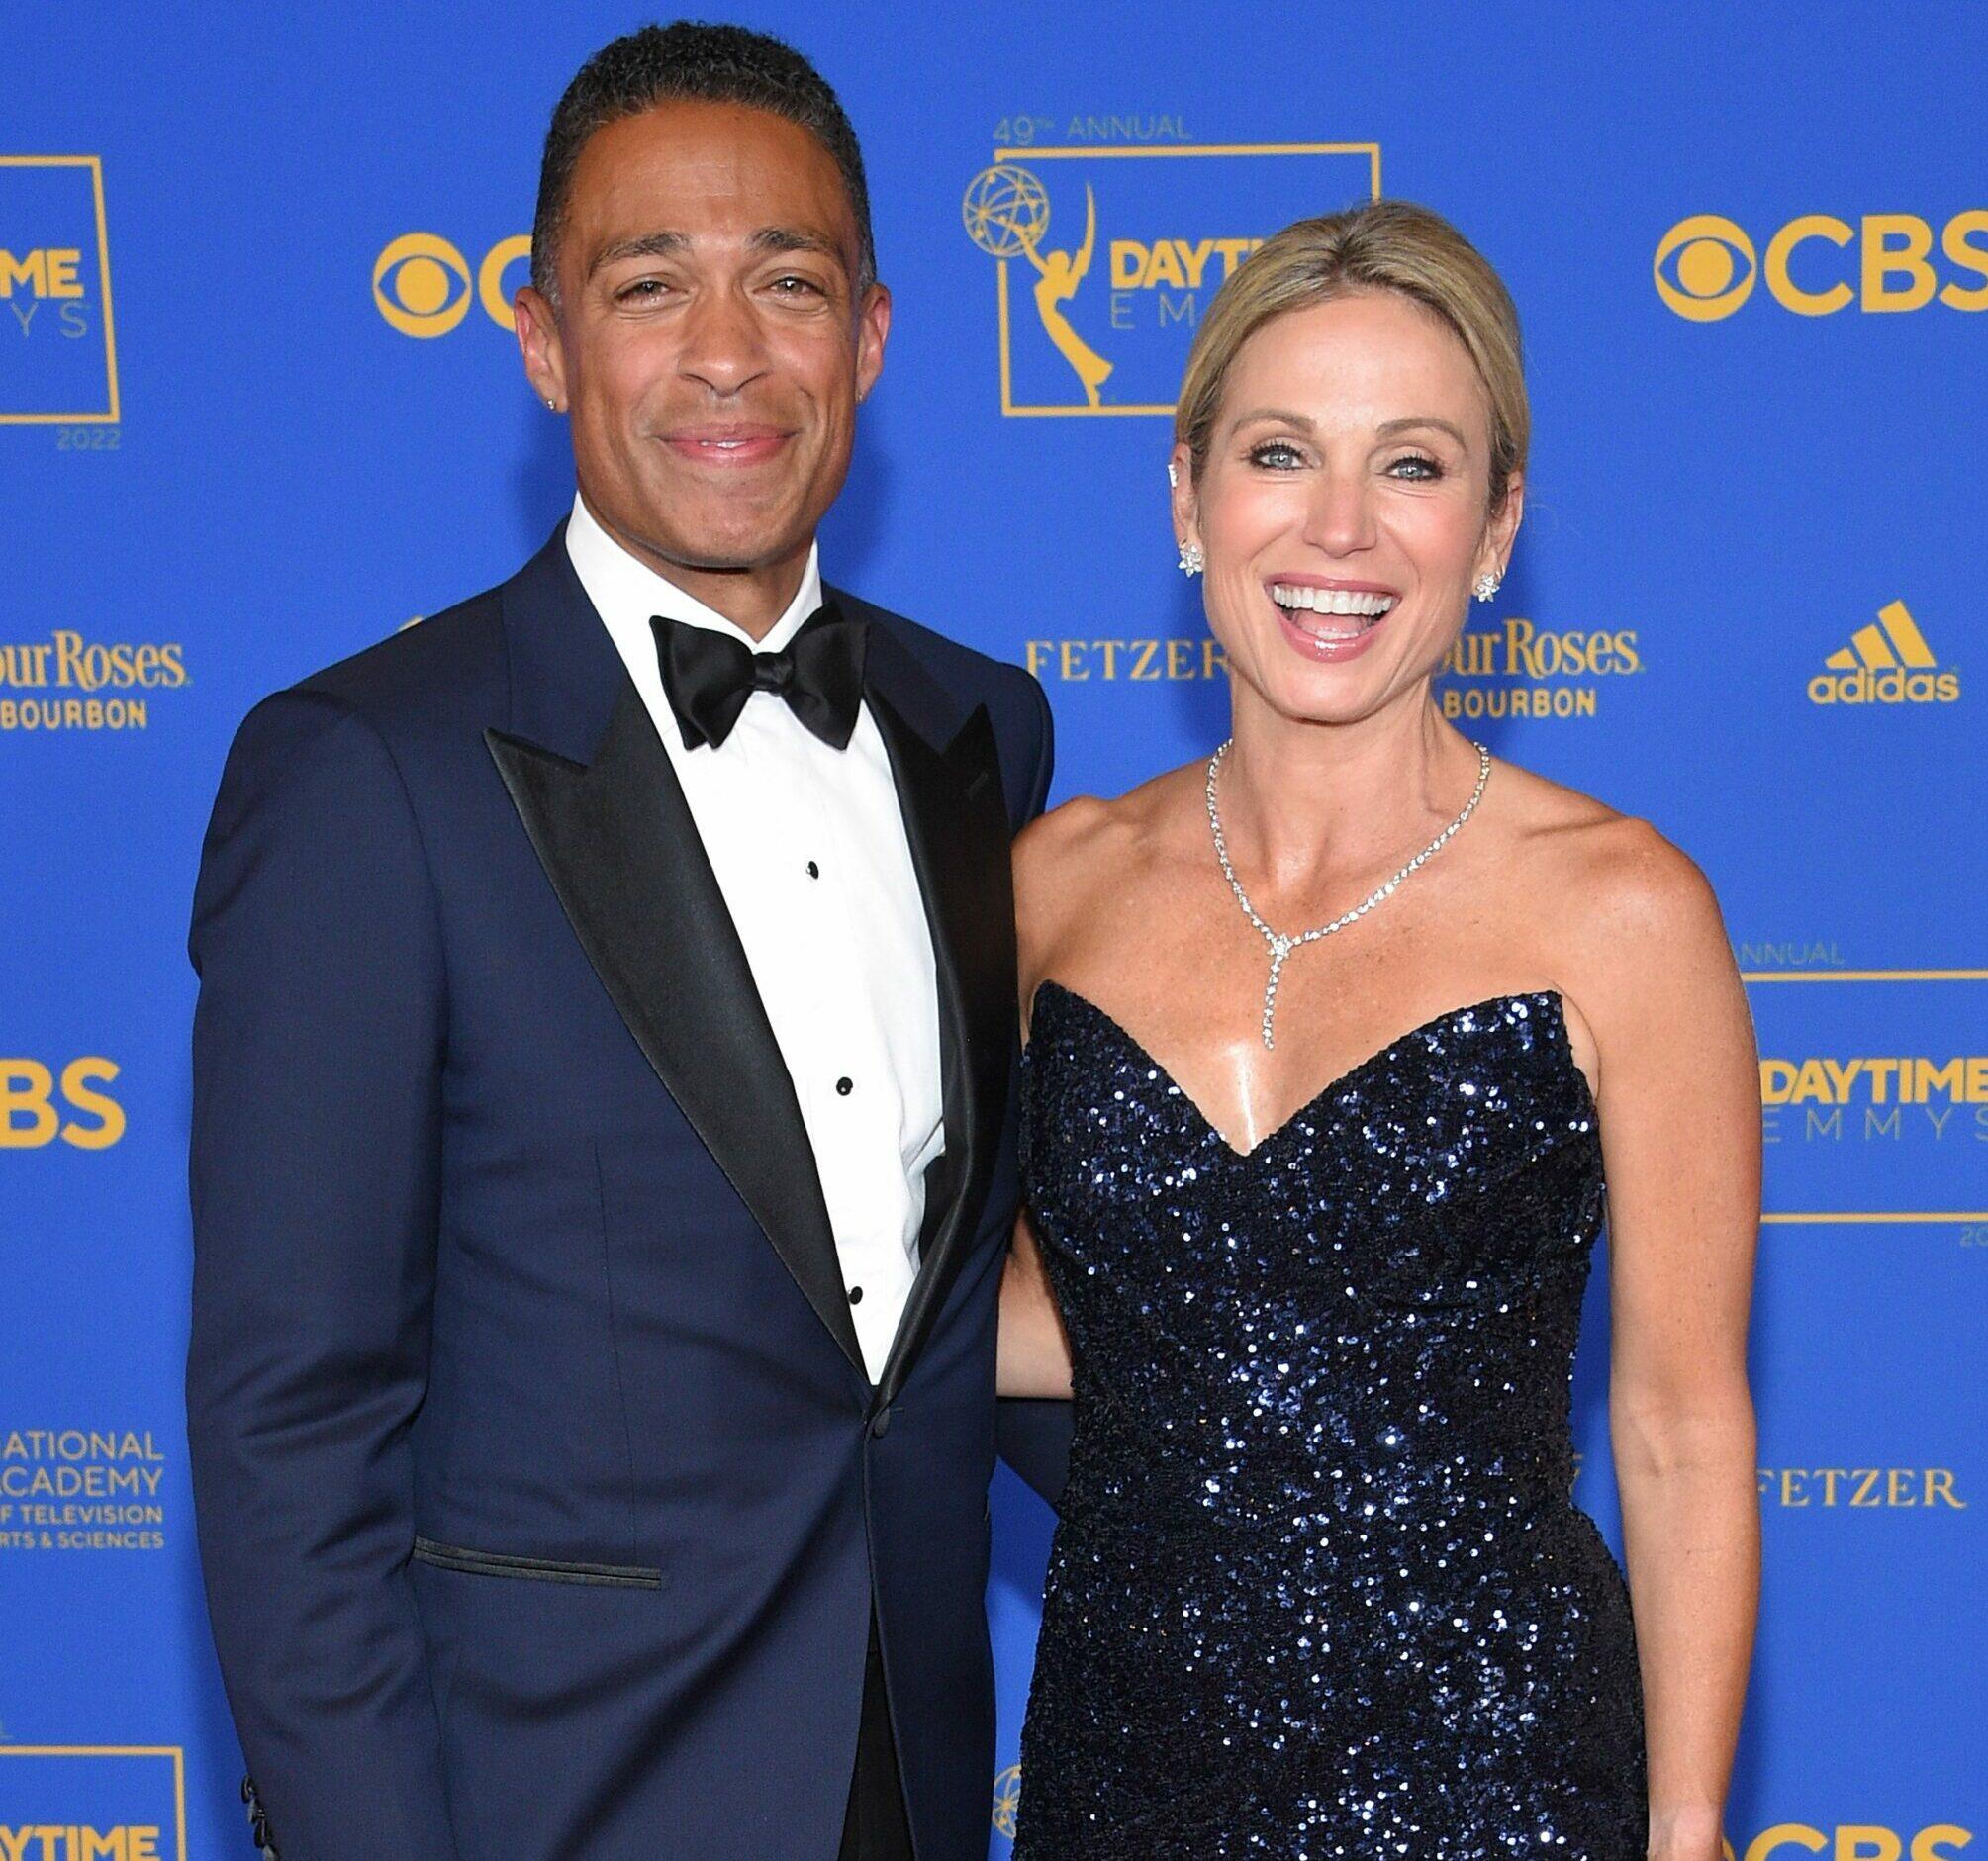 Amy Robach, T.J. Holmes at the Daytime Emmy Awards